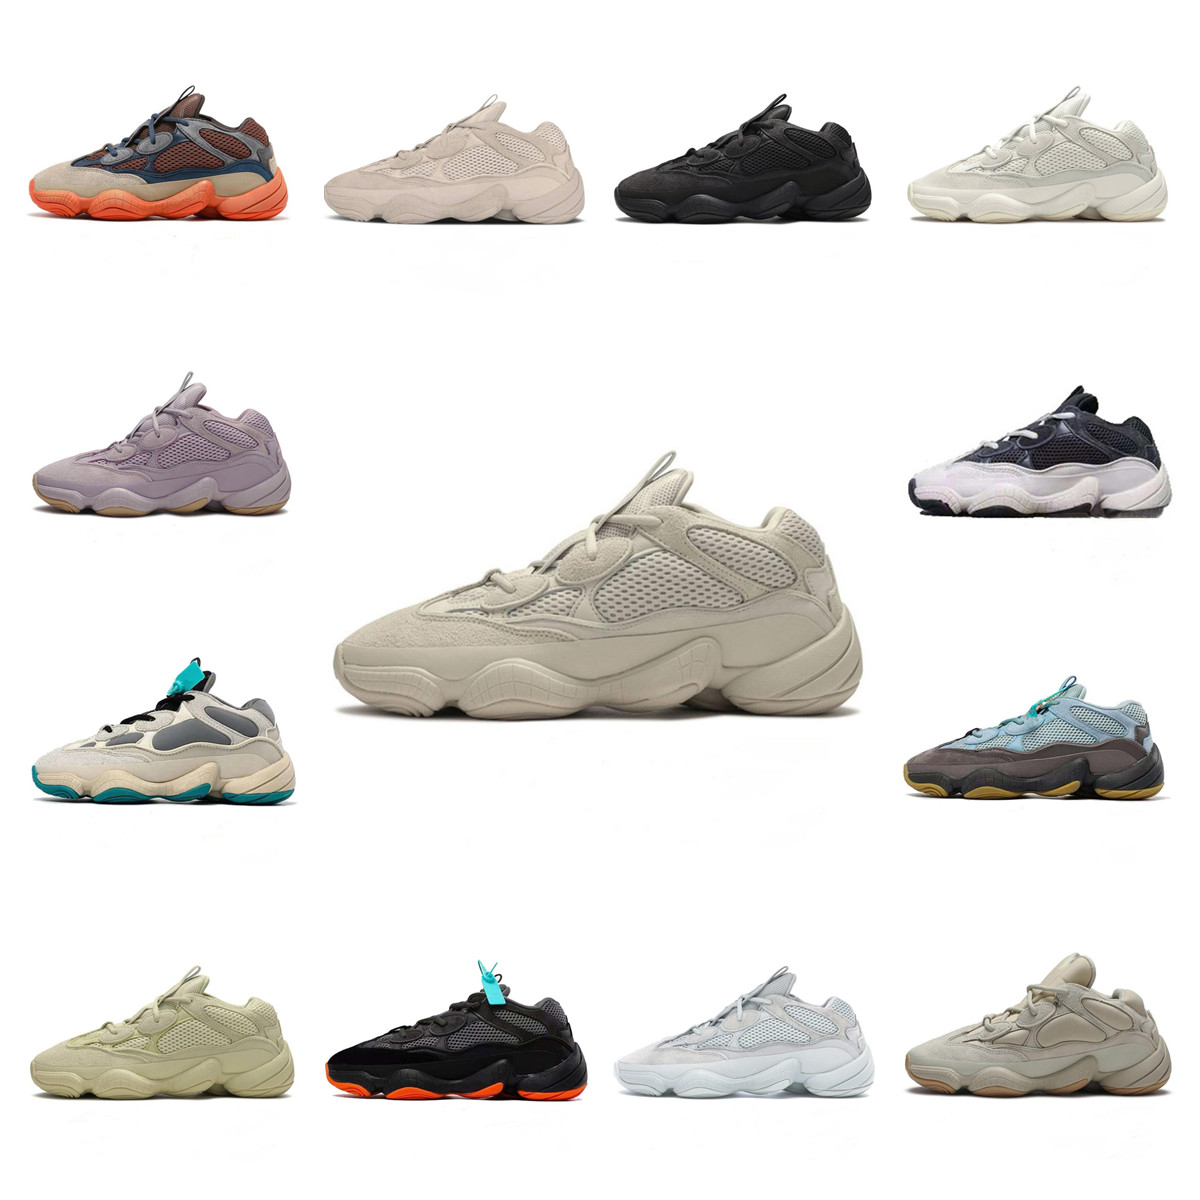 

With box Kanye 500 Mens Running Shoes 500s Enflame Taupe Light Reflective Bone White Utility Black Moon Yellow Blush Soft Vision Salt Pink Women Trainers Sneakers, 14